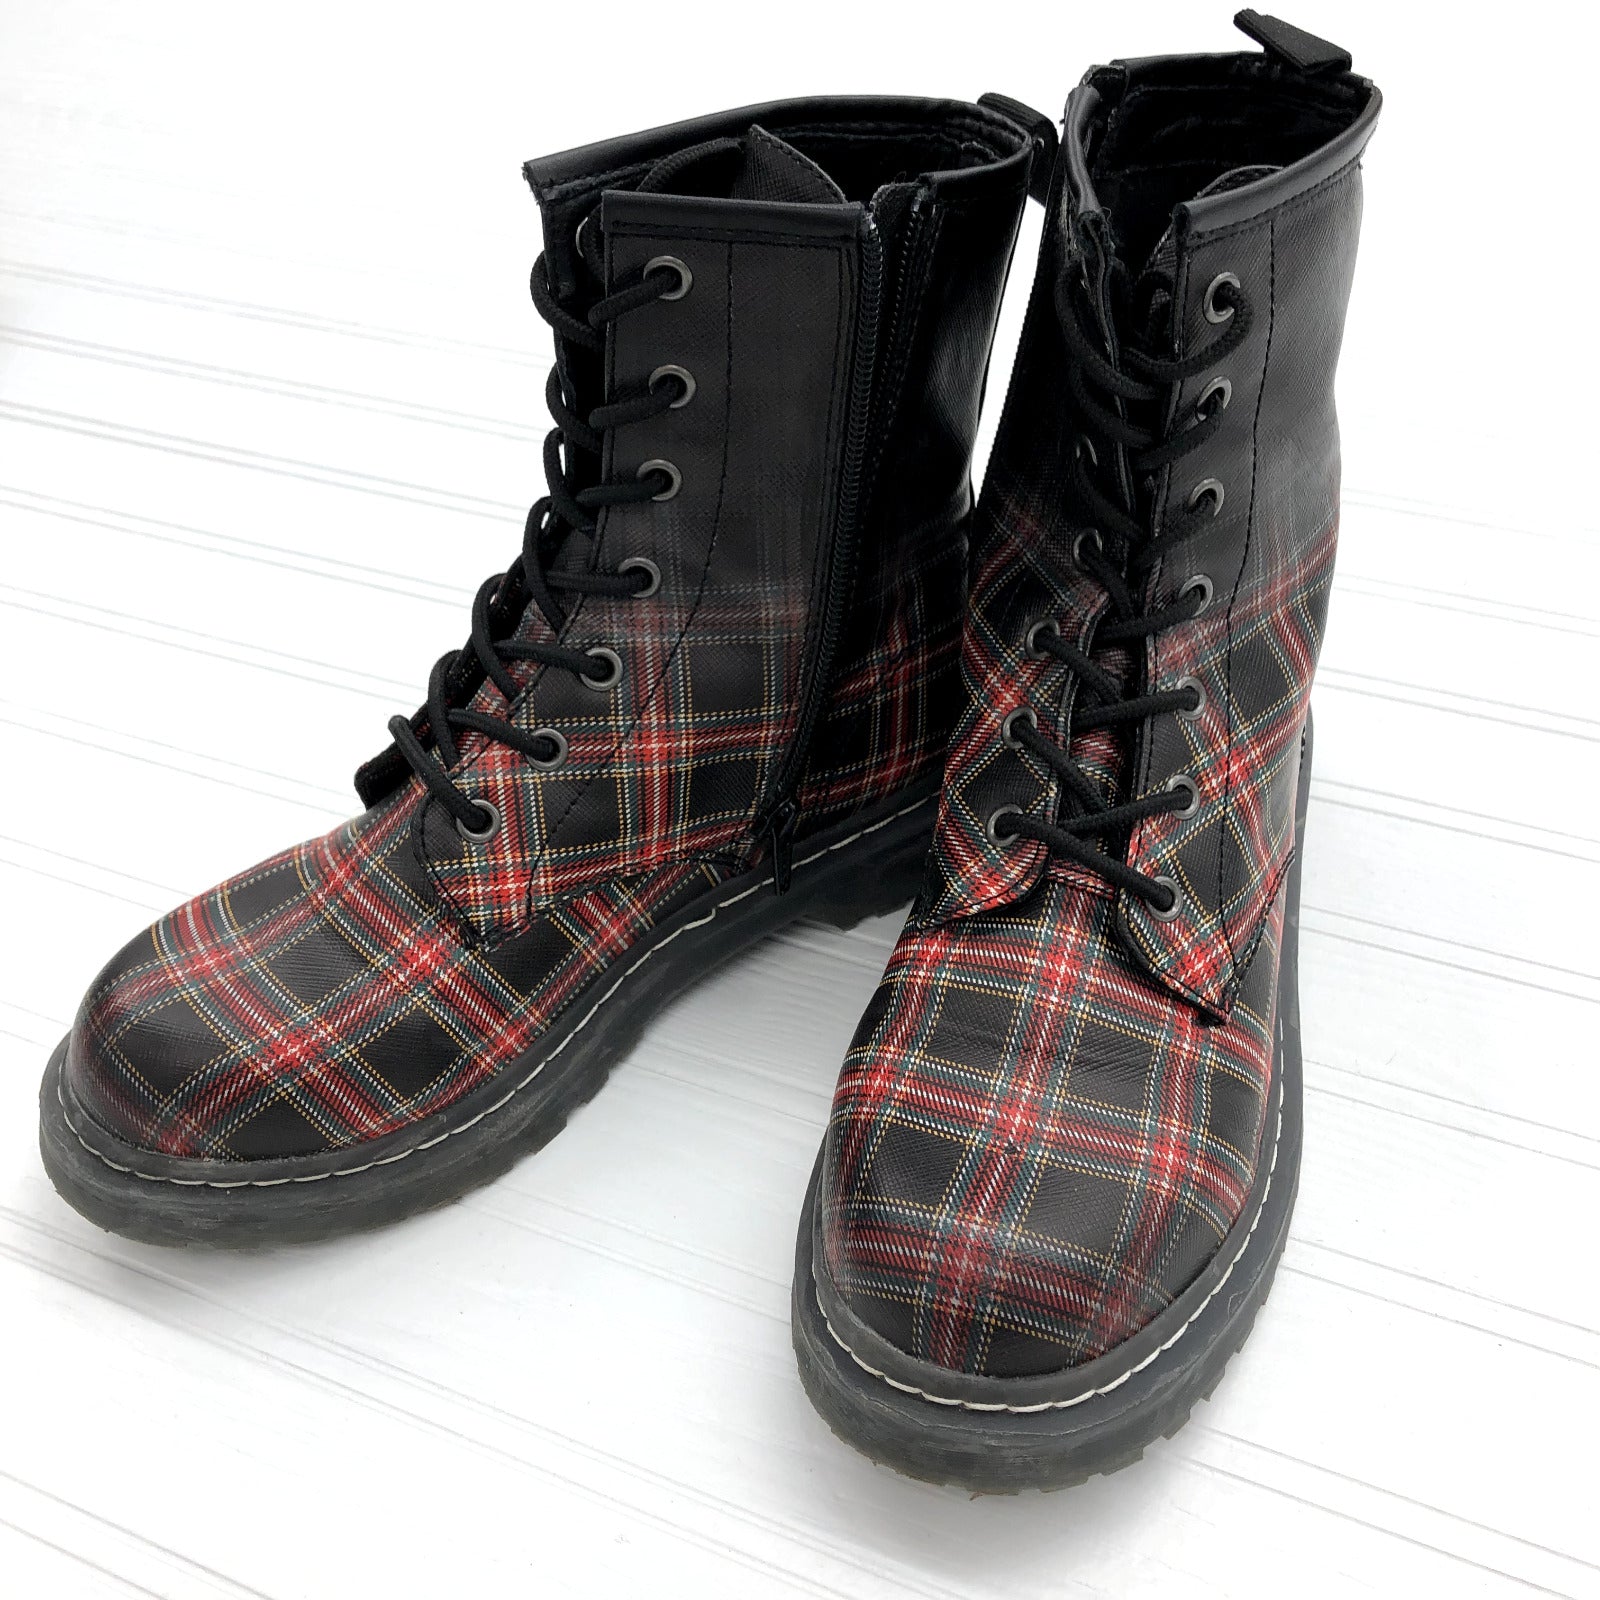 Wild Pair RYYDERP Red Plaid Lace Up Zipper Combat Lug Boots Size 6.5 *